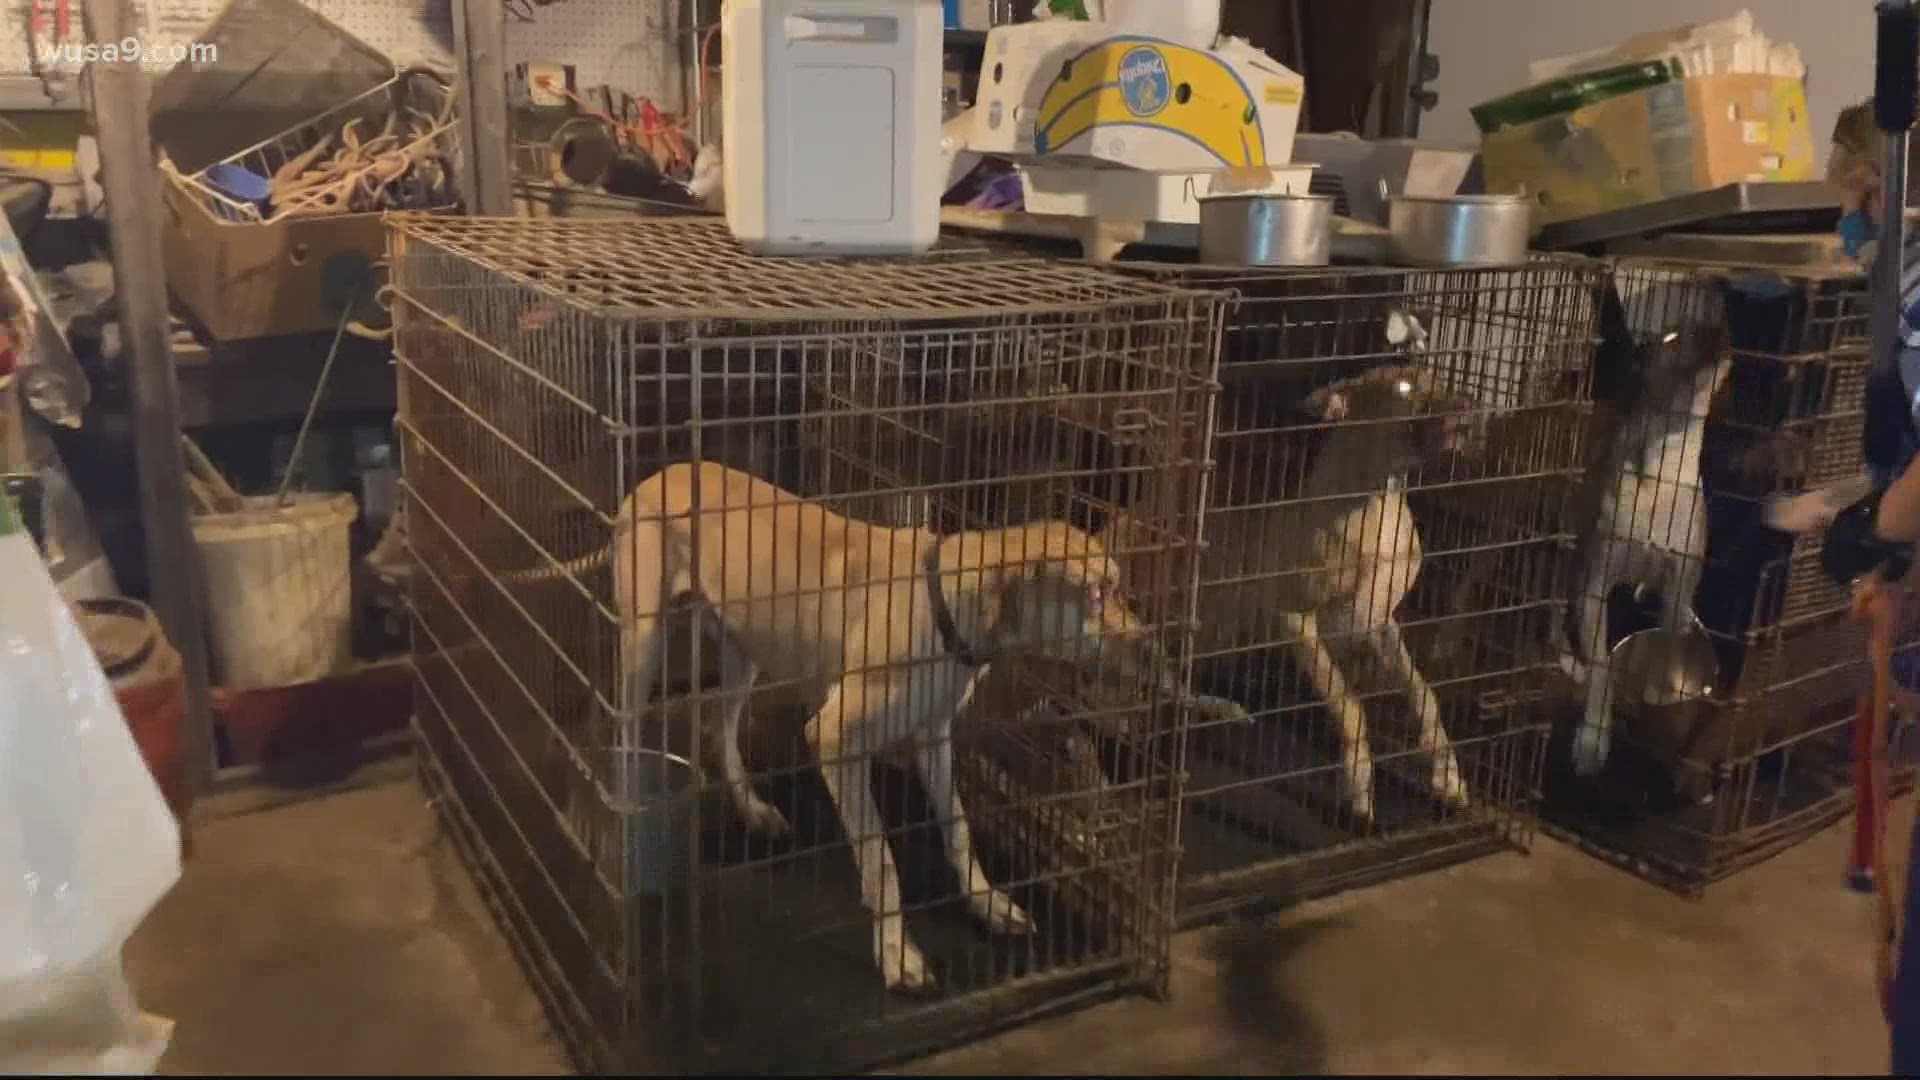 The Humane Rescue Alliance says there's evidence the man was breeding Great Dane puppies to sell them.